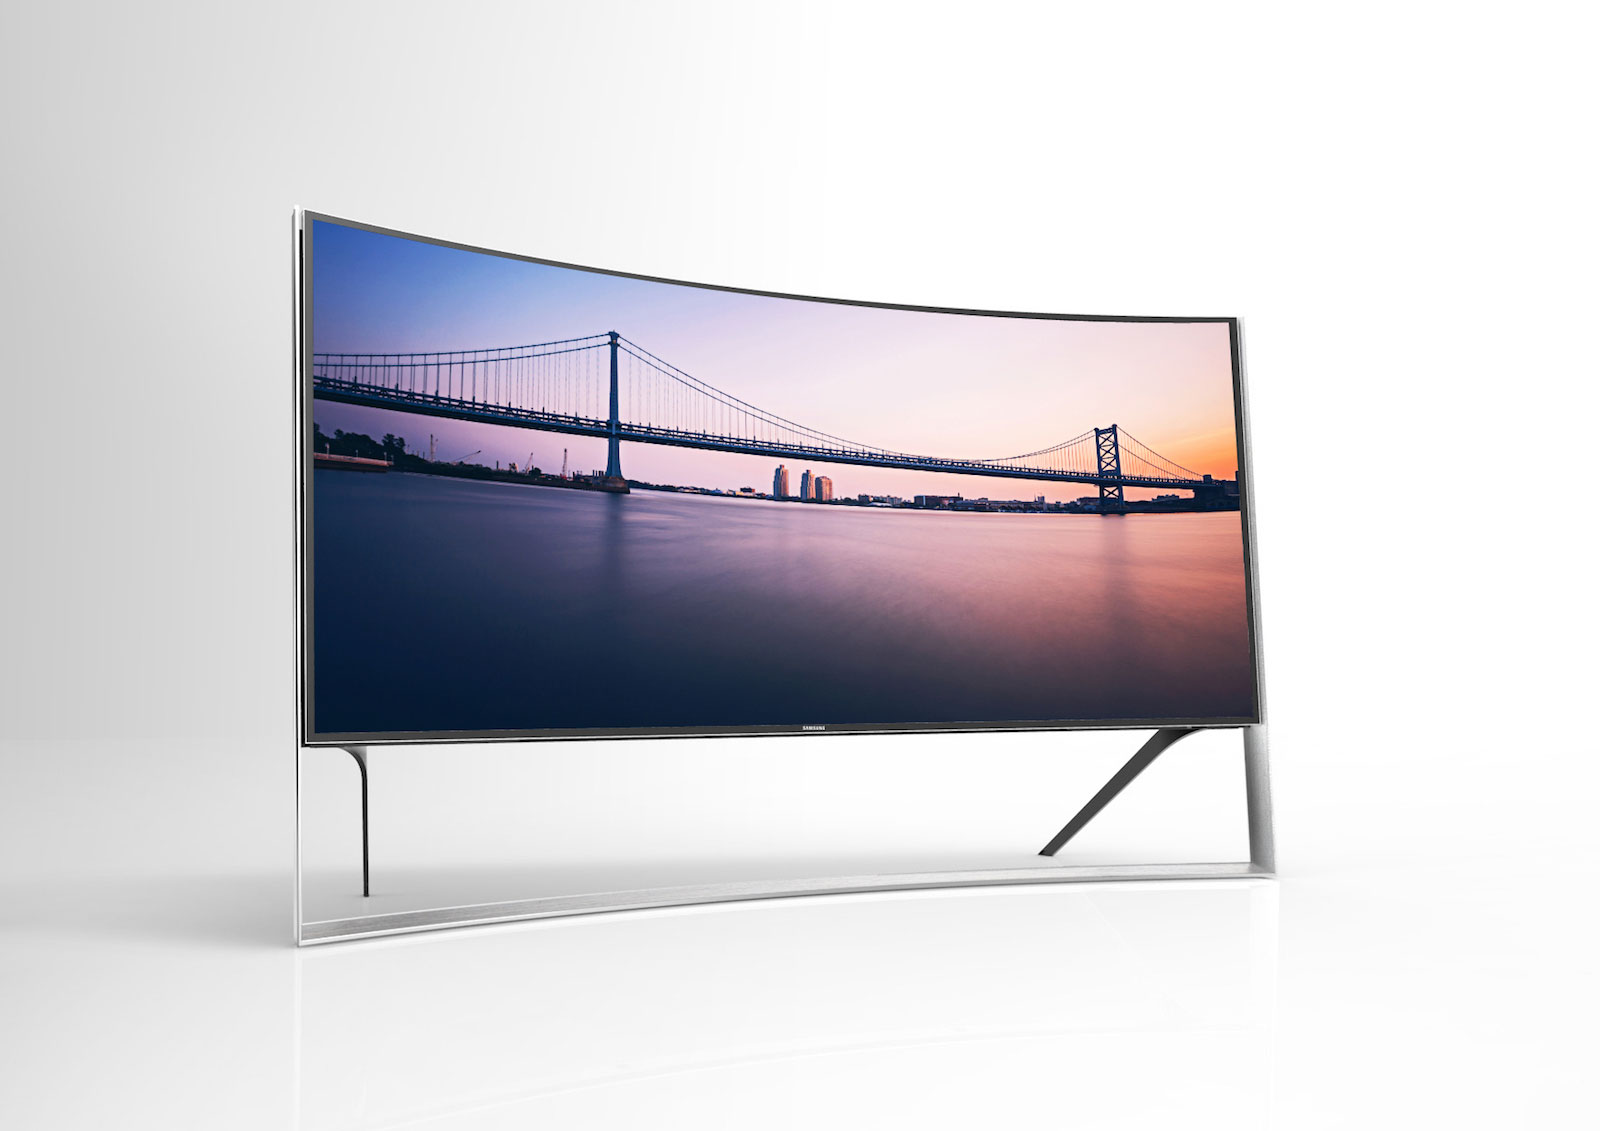 Samsung Curved 105-Inch TV